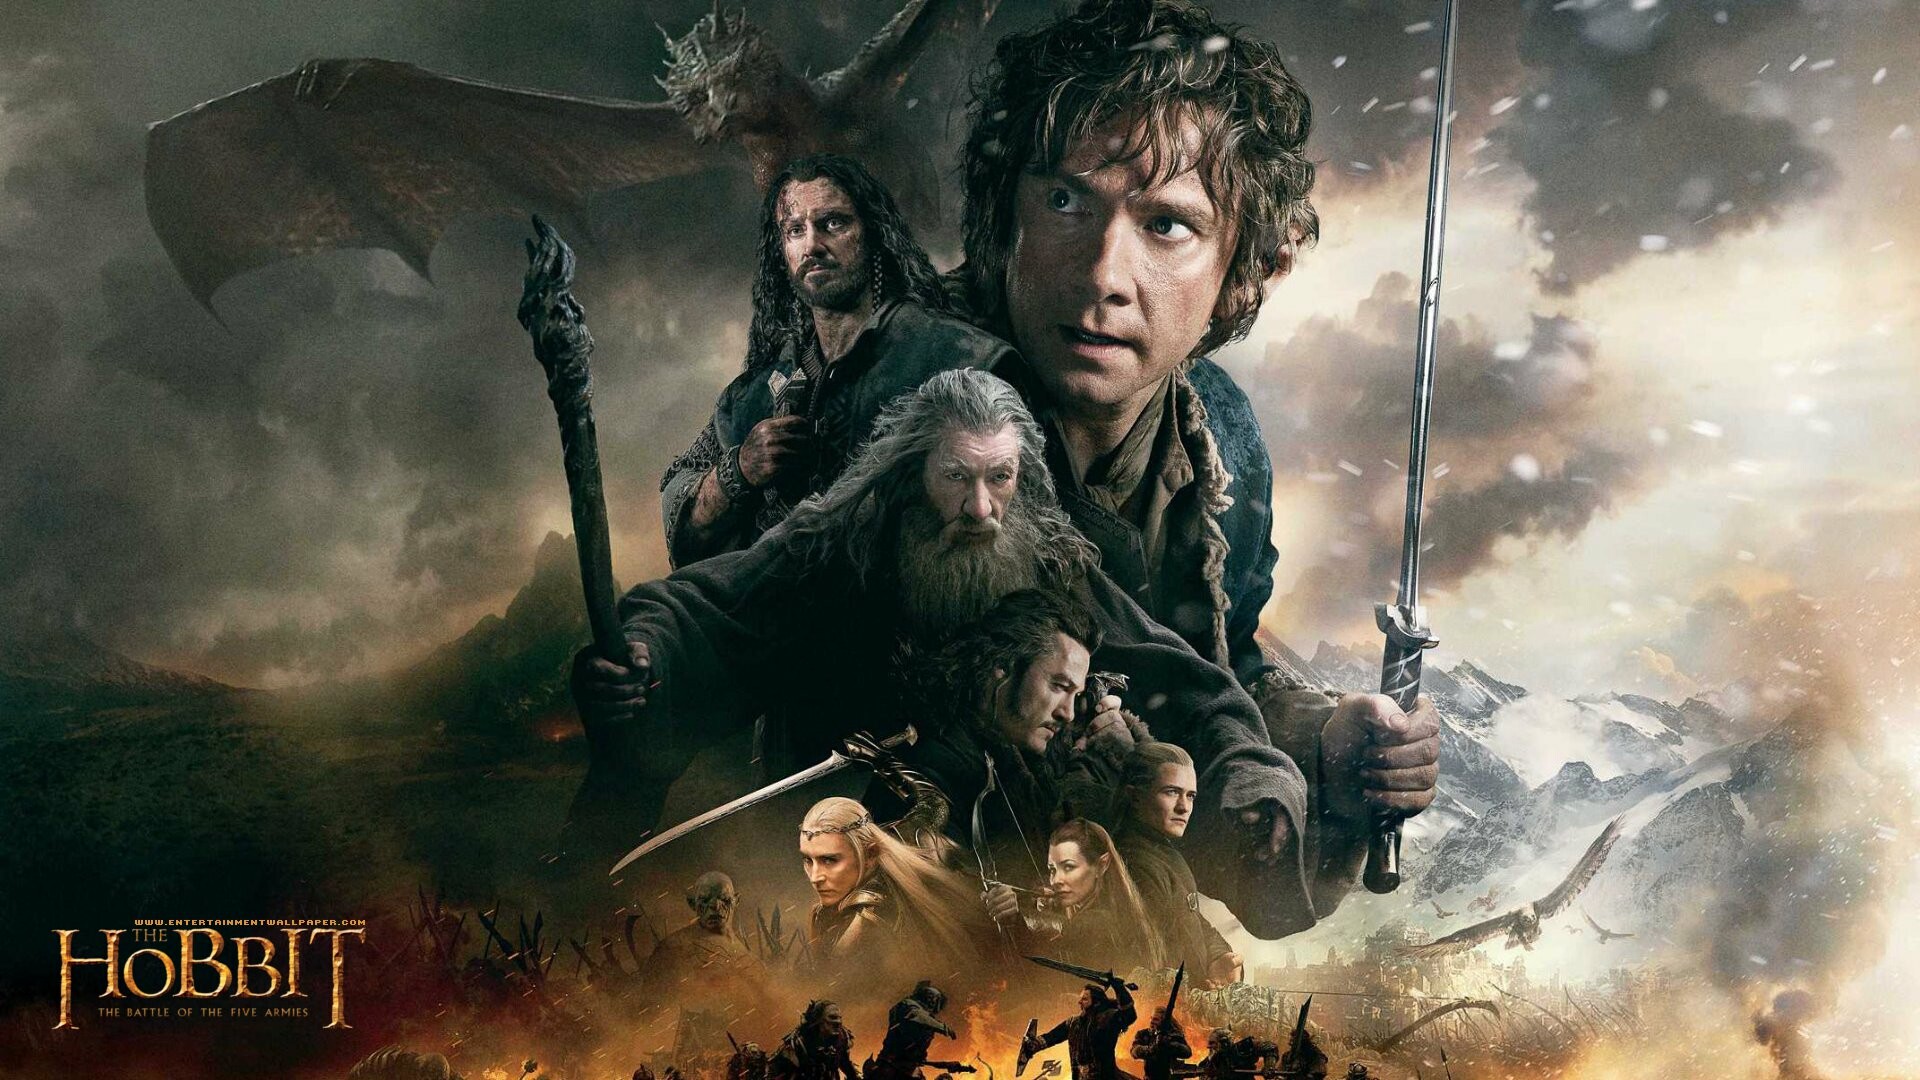 The Hobbit: The Battle of the Five Armies, The film's story concludes the adventure of Bilbo Baggins and Thorin Oakenshield's company of dwarves,. 1920x1080 Full HD Background.